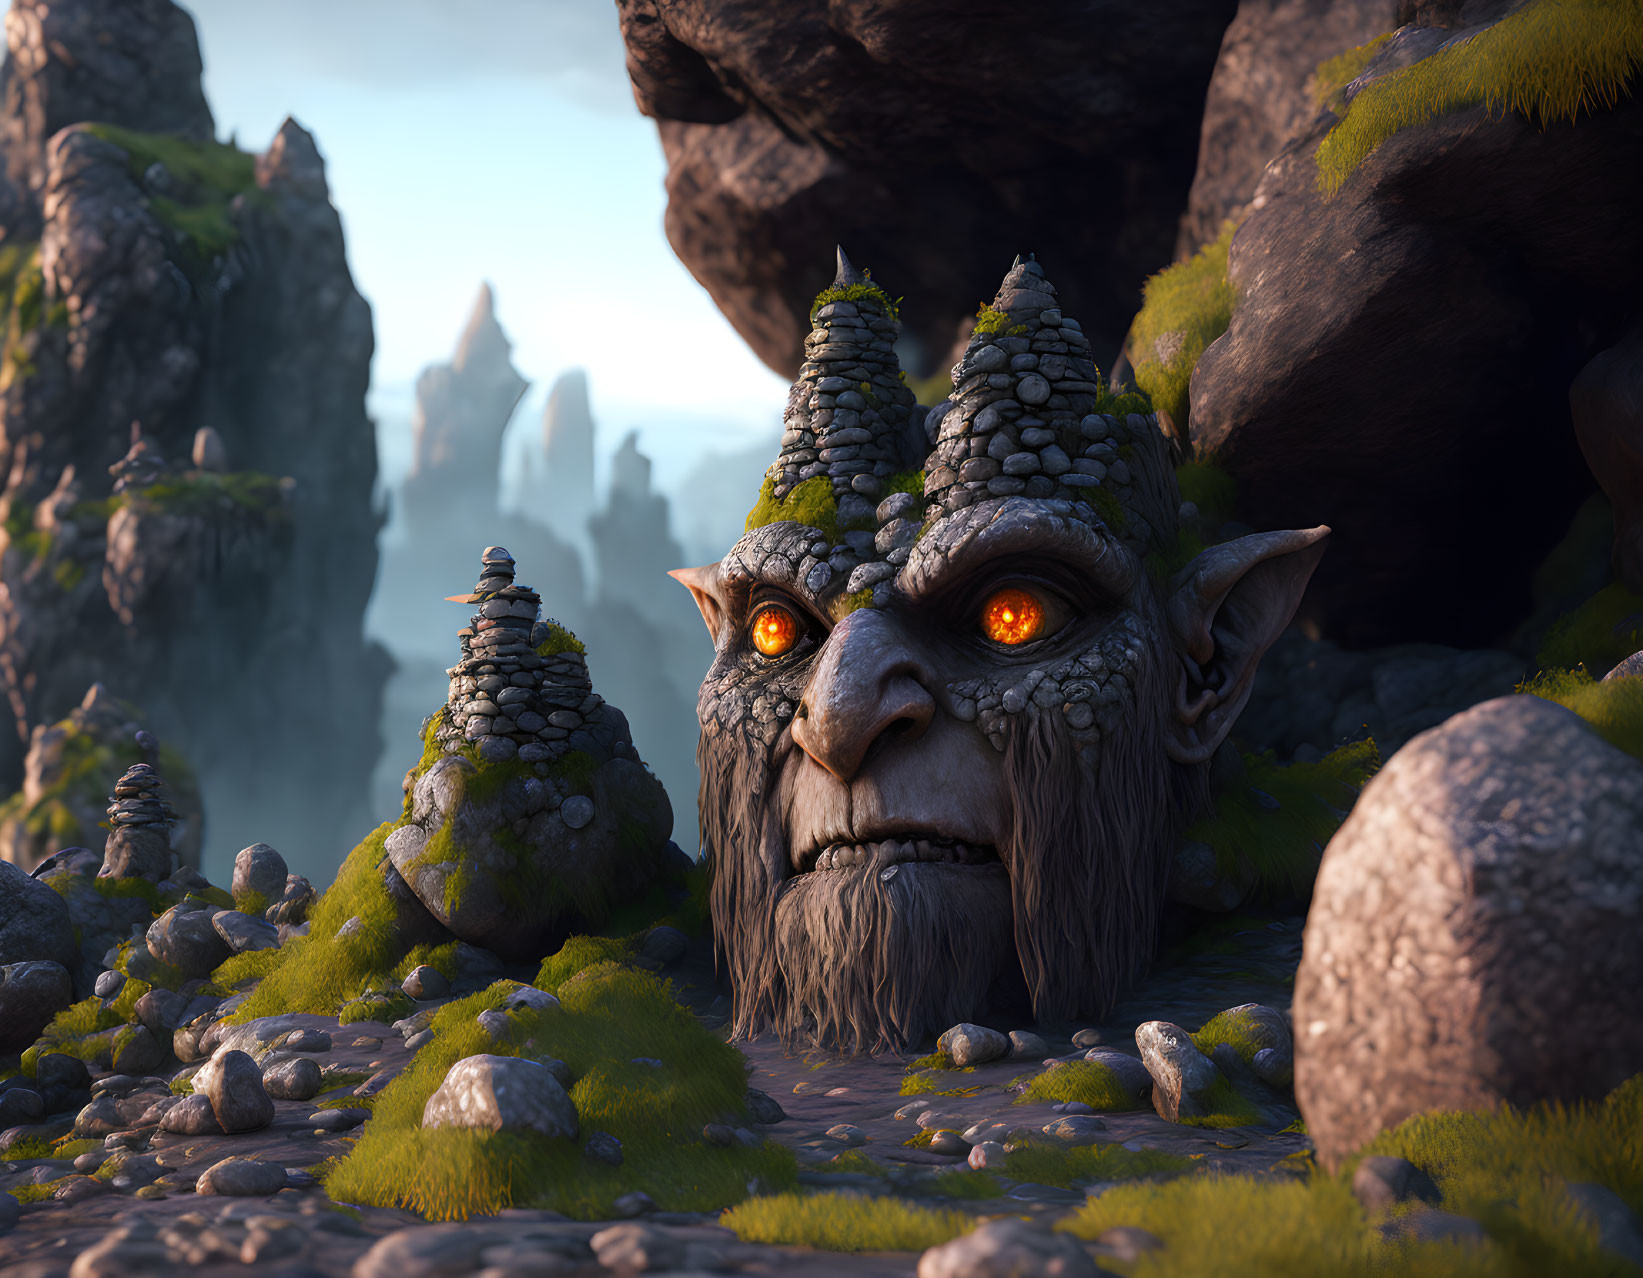 CG image of stone-faced creature with moss and orange eyes in rocky landscape